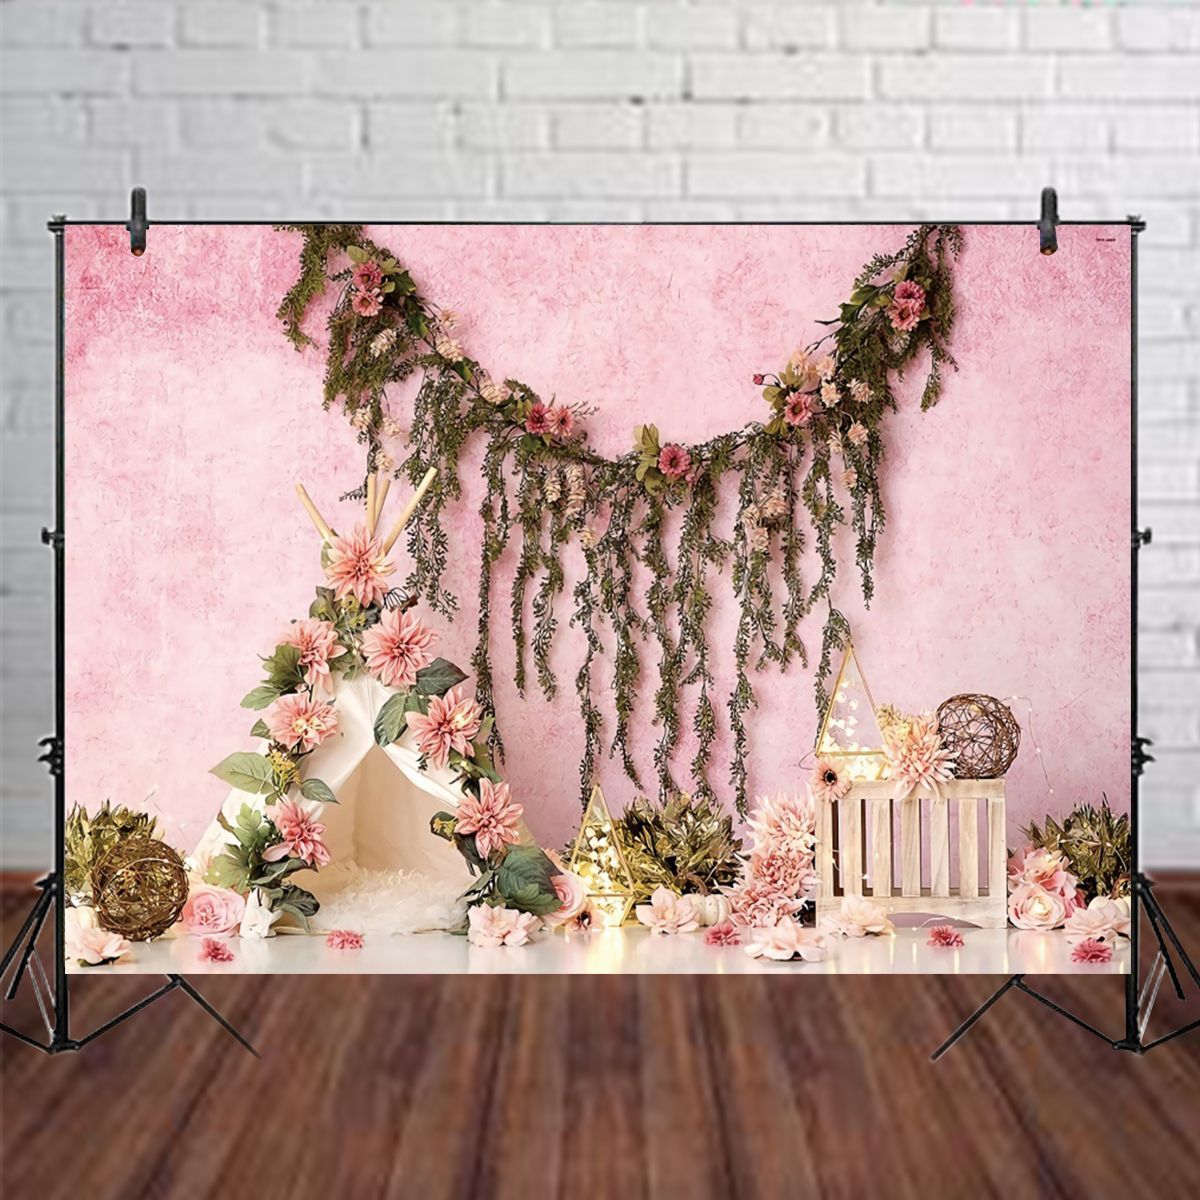 5x3FT-7x5FT-9x6FT-Flower-Decor-Pink-Wall-Photography-Backdrop-Background-Studio-Prop-1636012